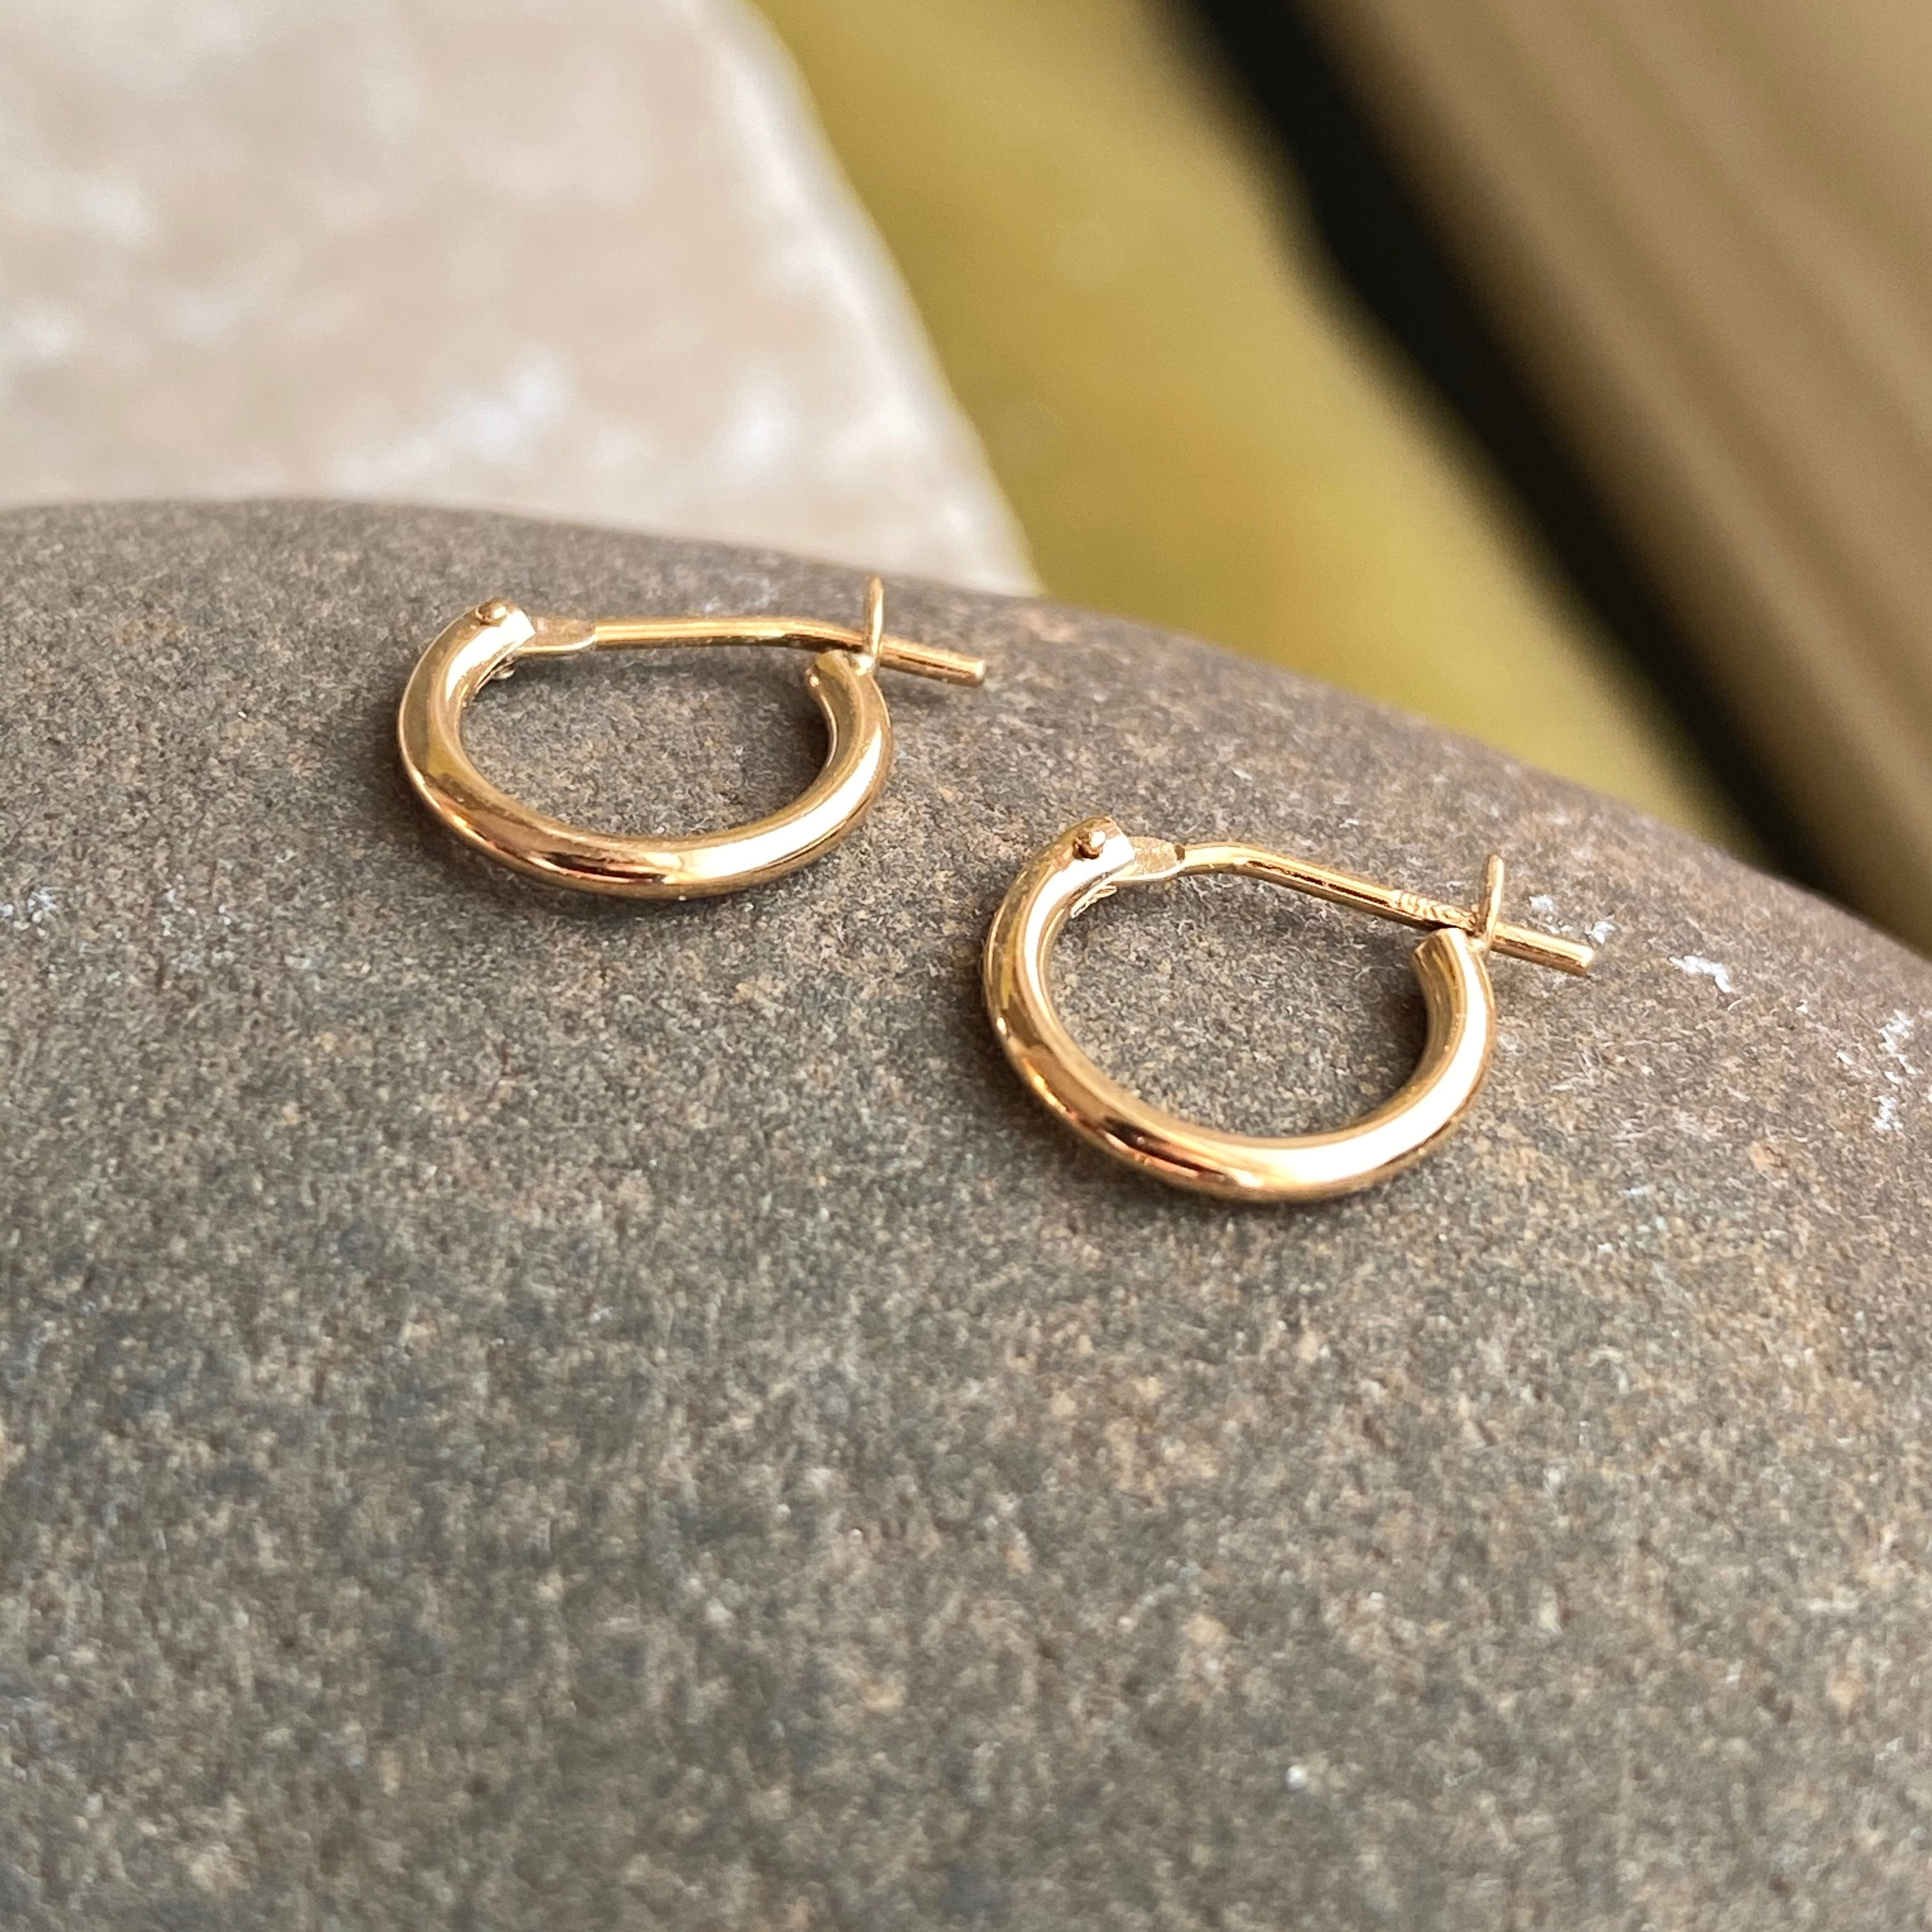 Amazon.com: Small Cartilage Hoop Earrings for Women/Men, Thin Piercing Hoop  Ring for Helix, Tragus, Conch, Nose (1 Pair 6mm,24g,14K Gold Filled) :  Handmade Products